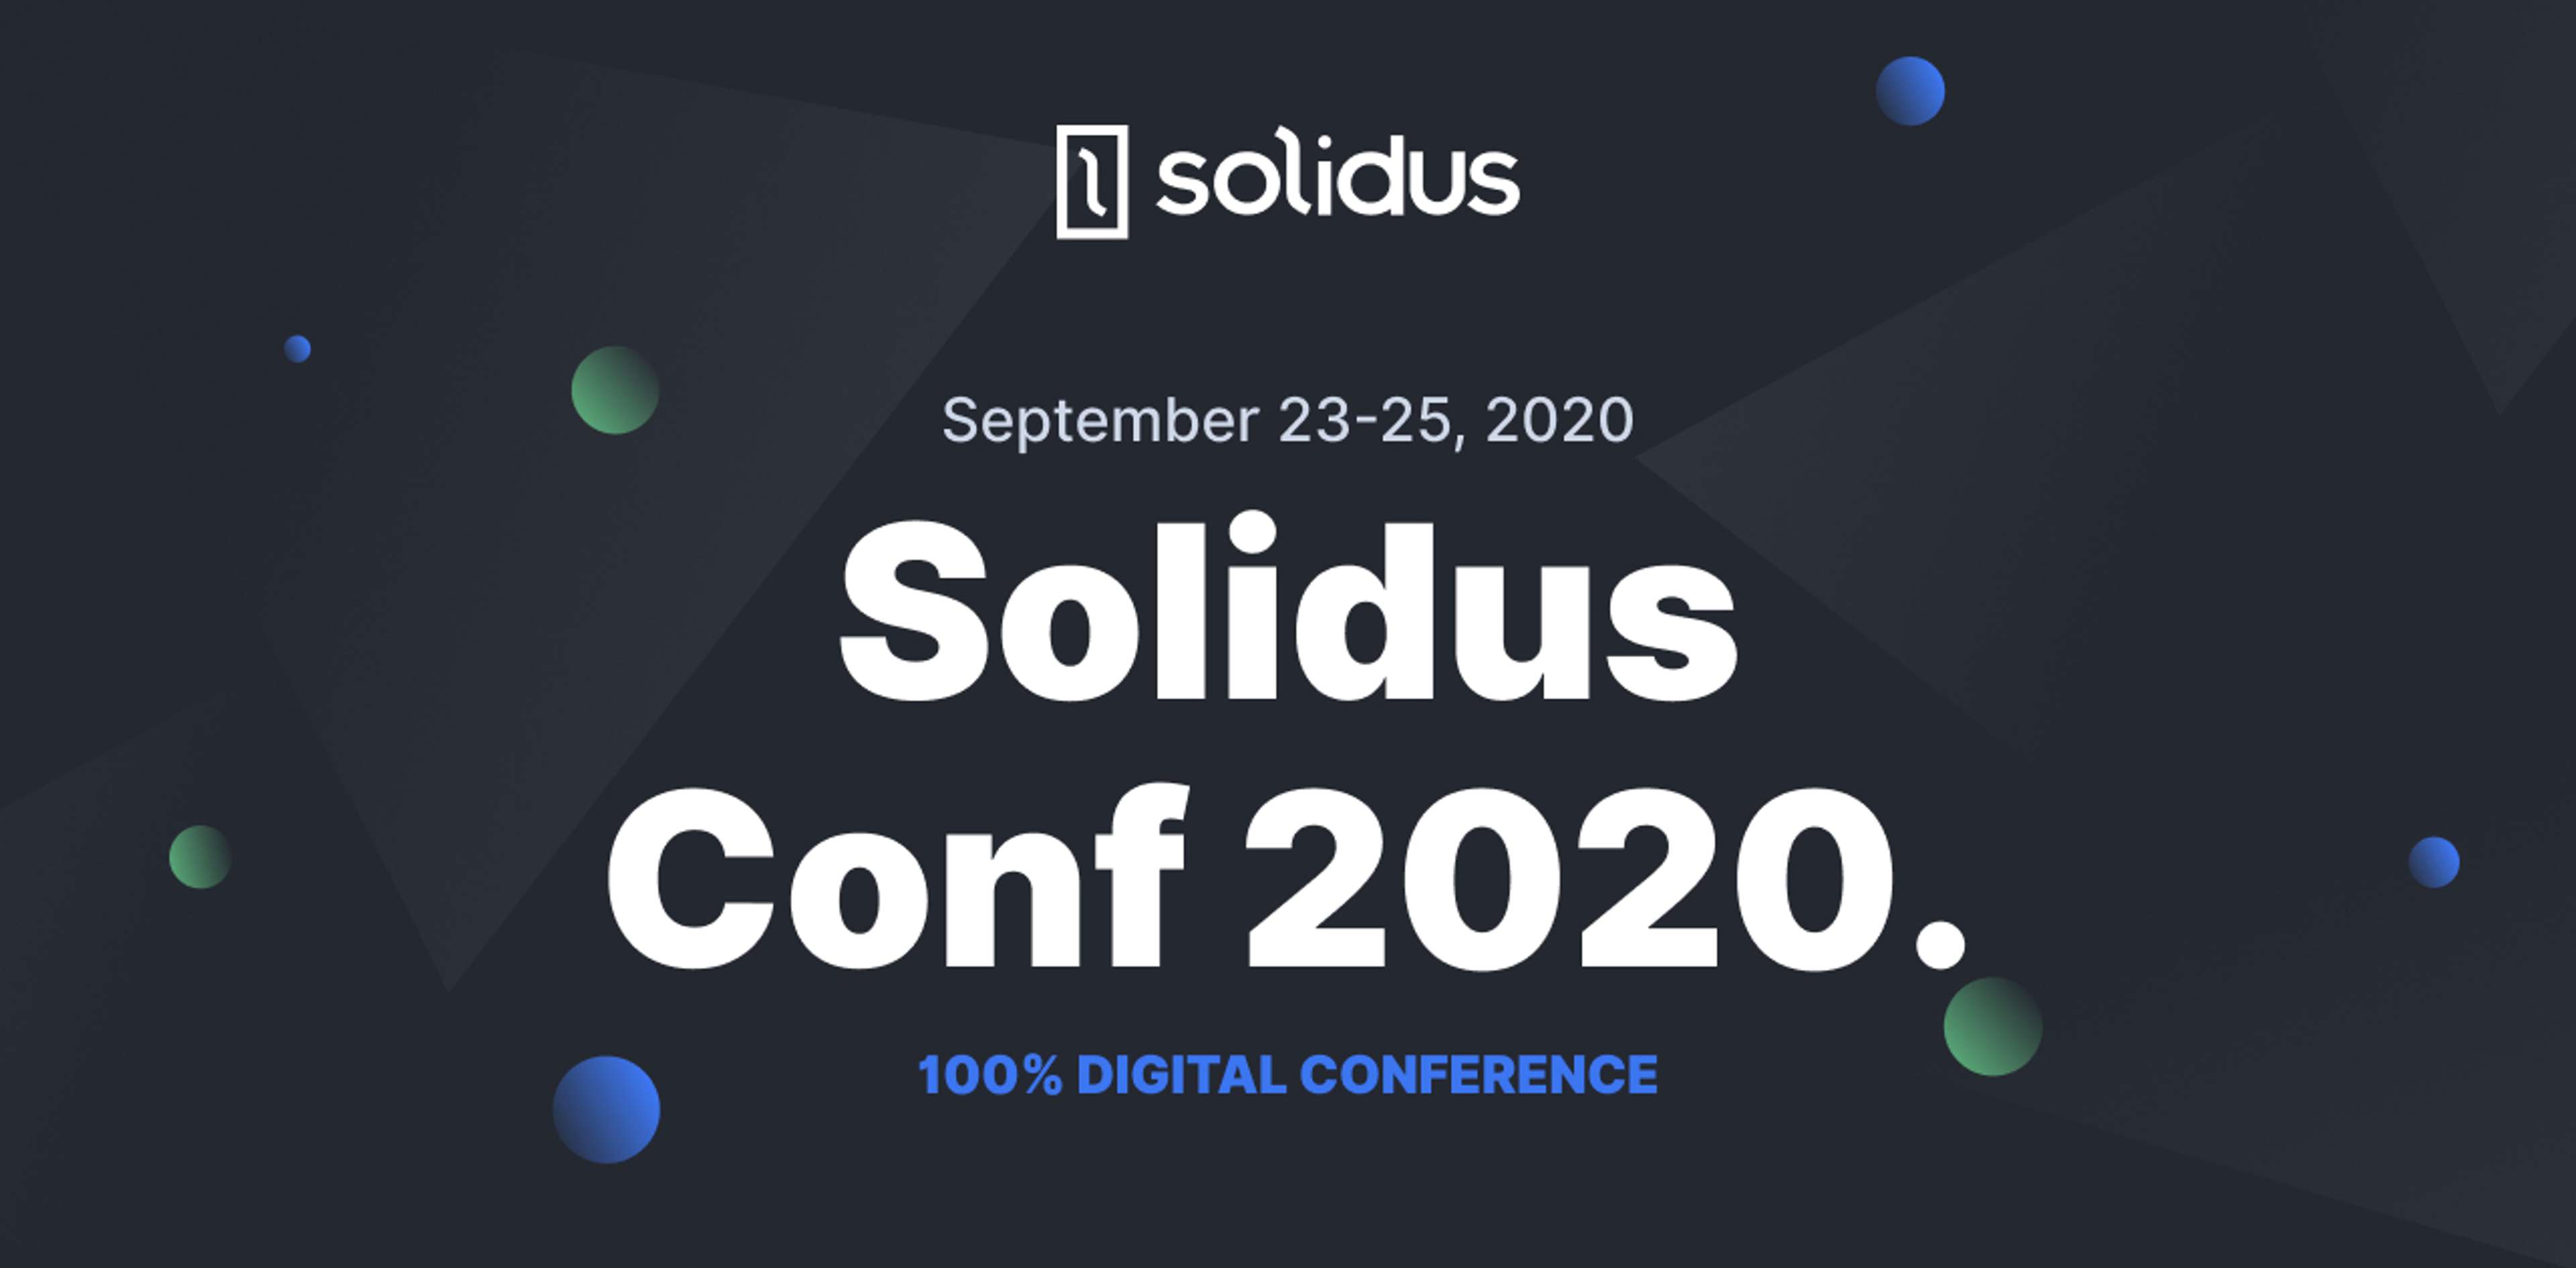 Announcing SolidusConf 2020